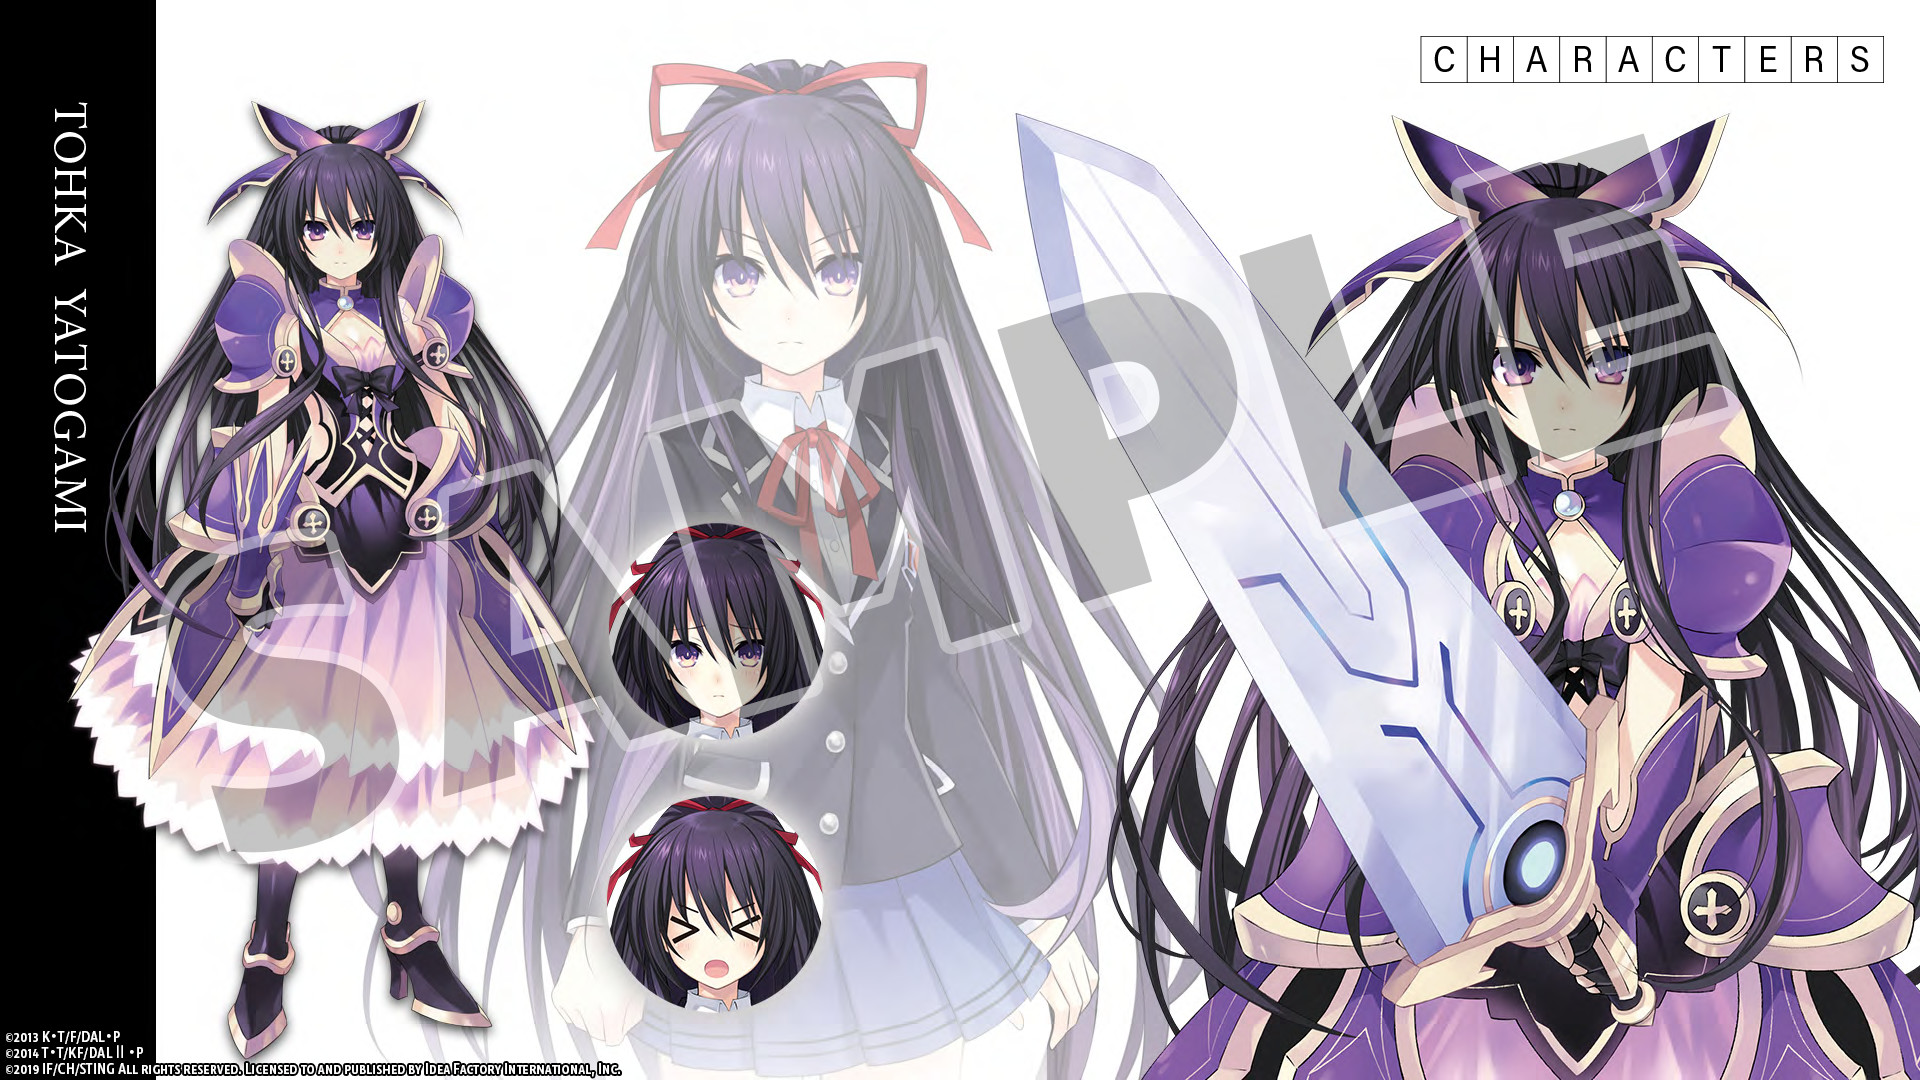 DATE A LIVE Rio Reincarnation - Deluxe Pack DLC Steam CD Key